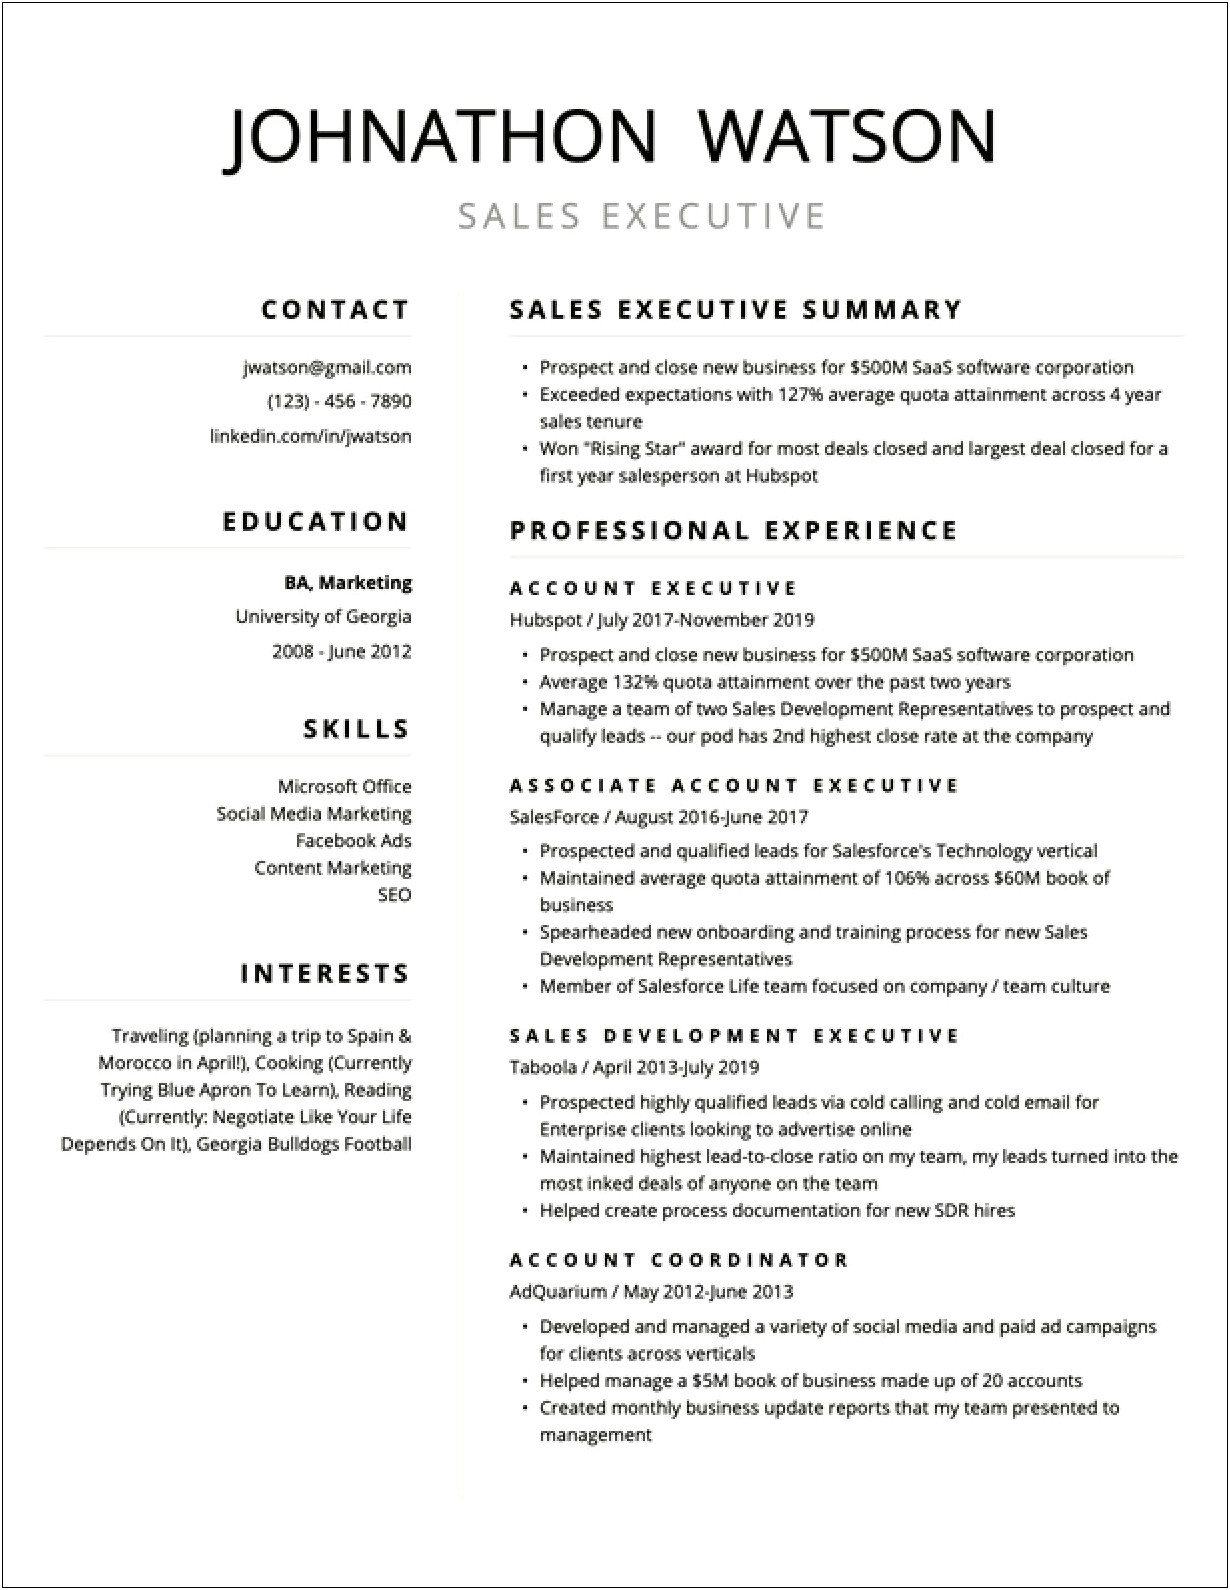 Online Job Resume Sent To Others